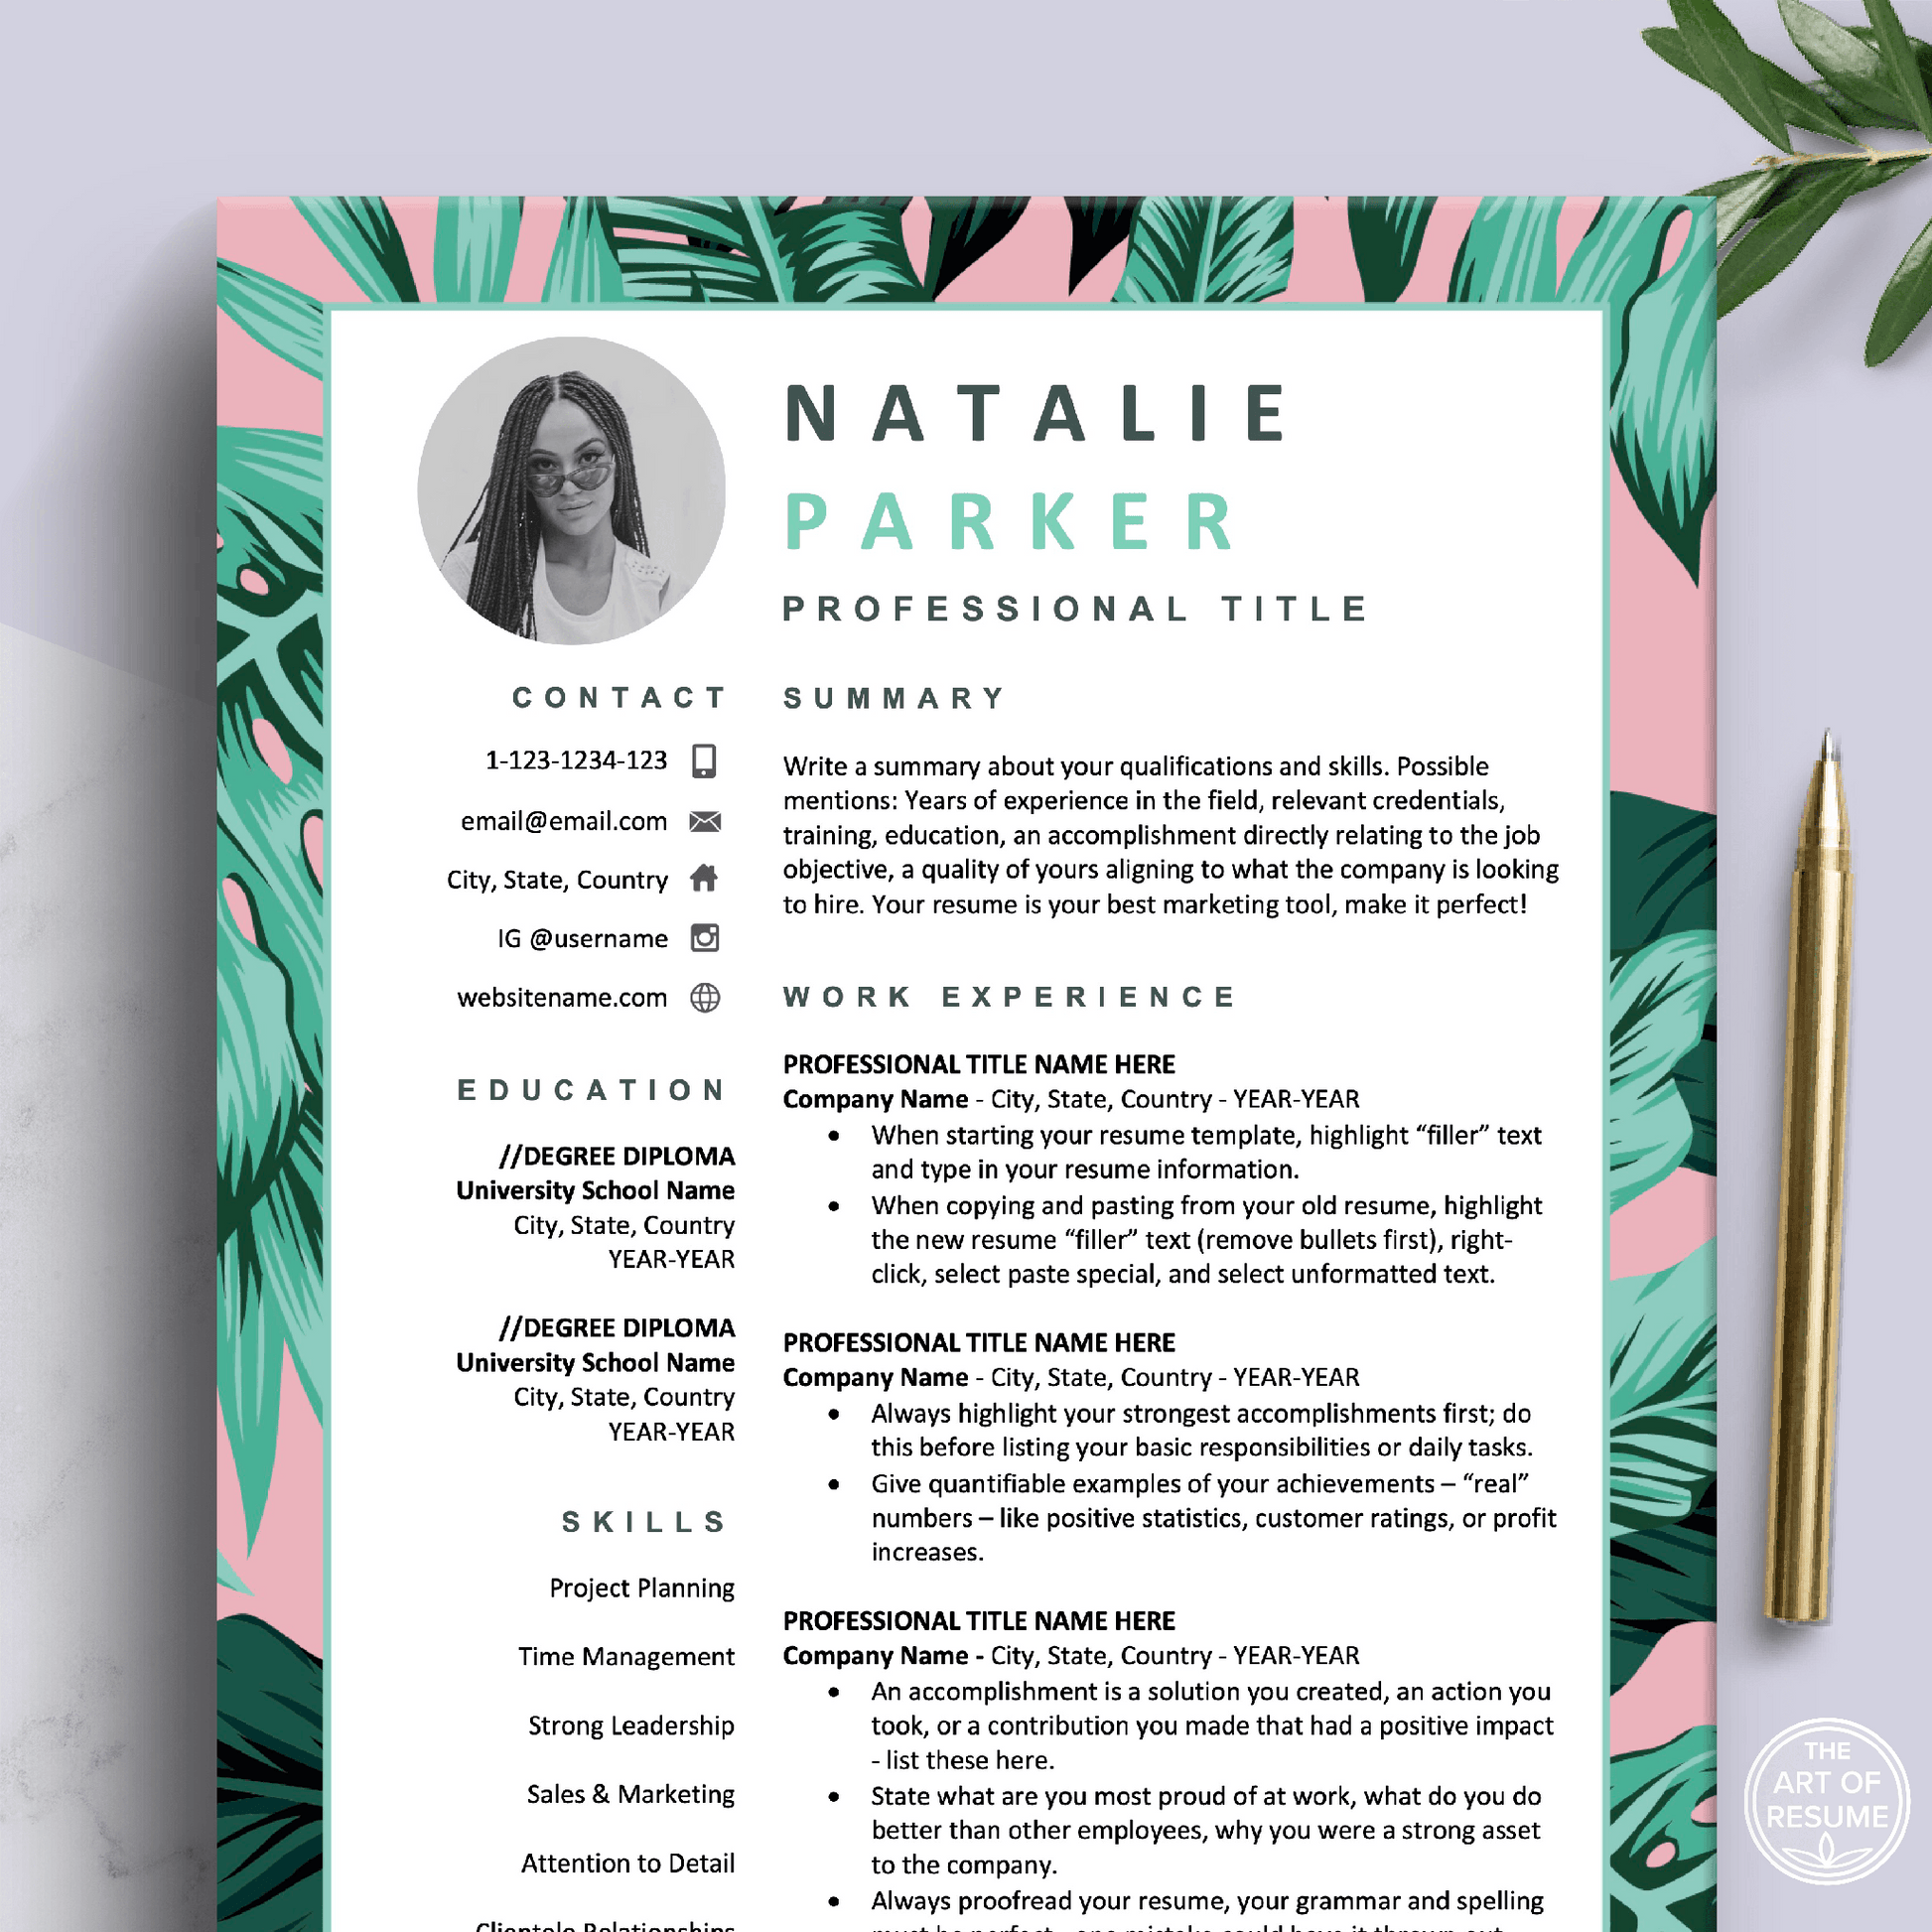 Creative Resume Templates with Photo | Custom Floral Resume Design - The Art of Resume